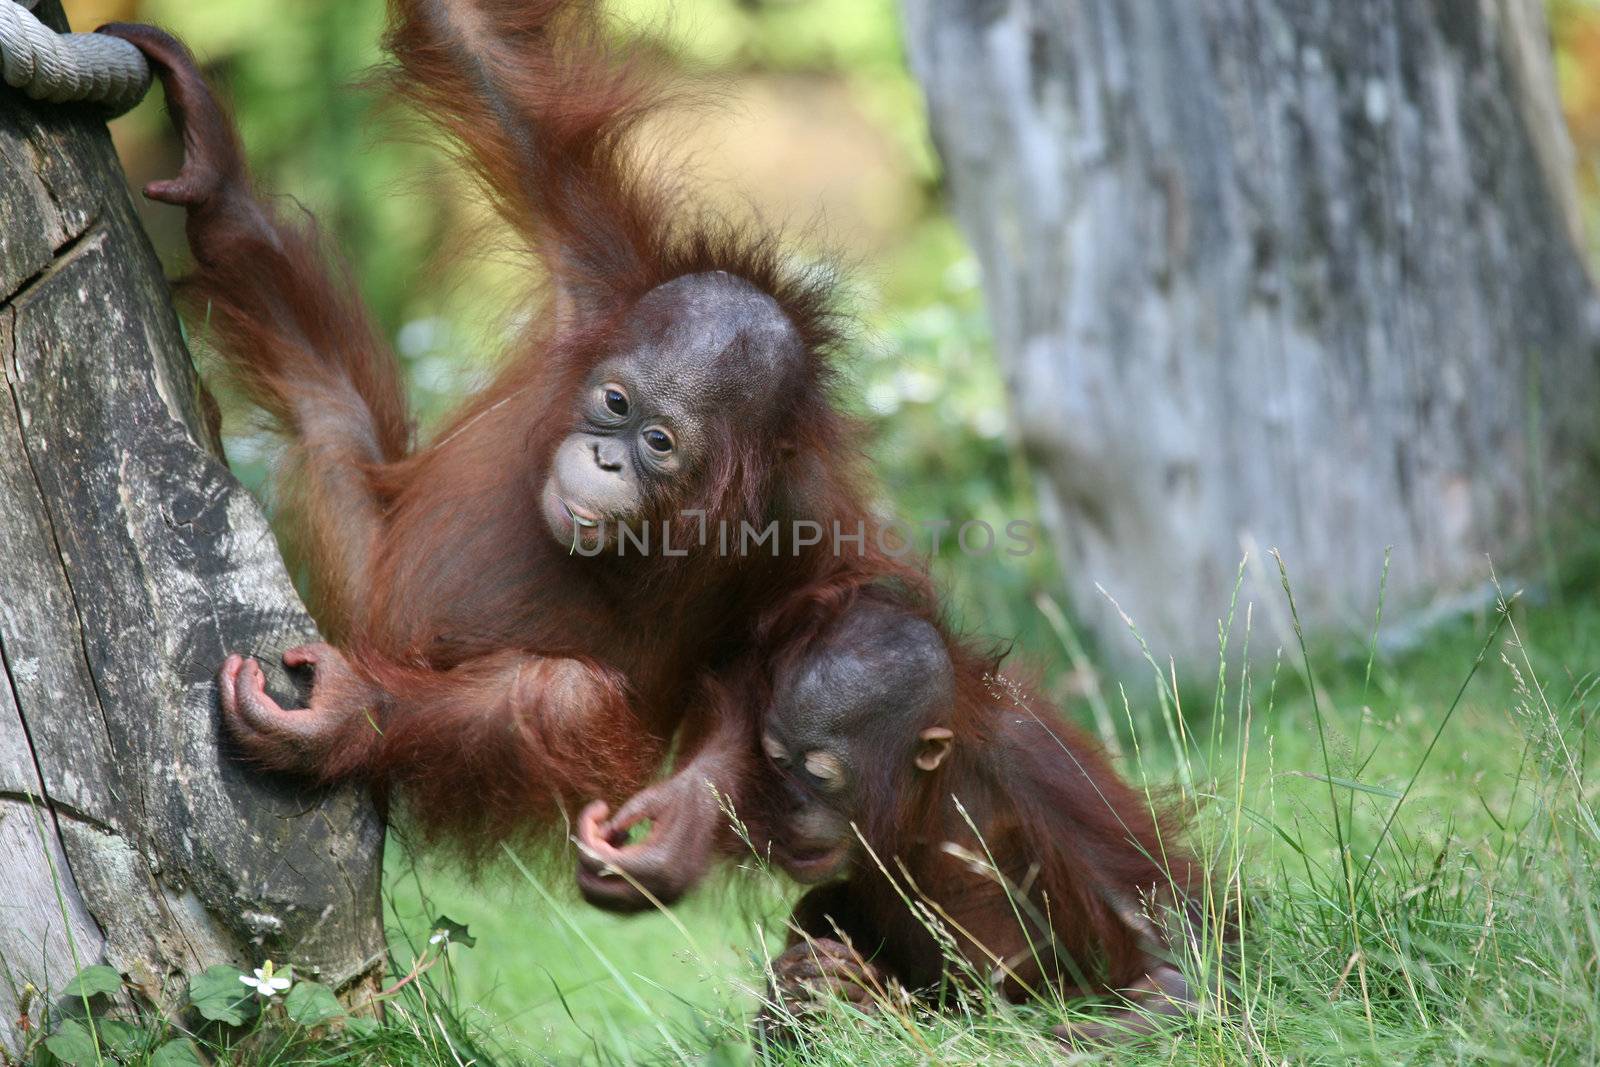 Two young orang utan babies playing together in the zoo